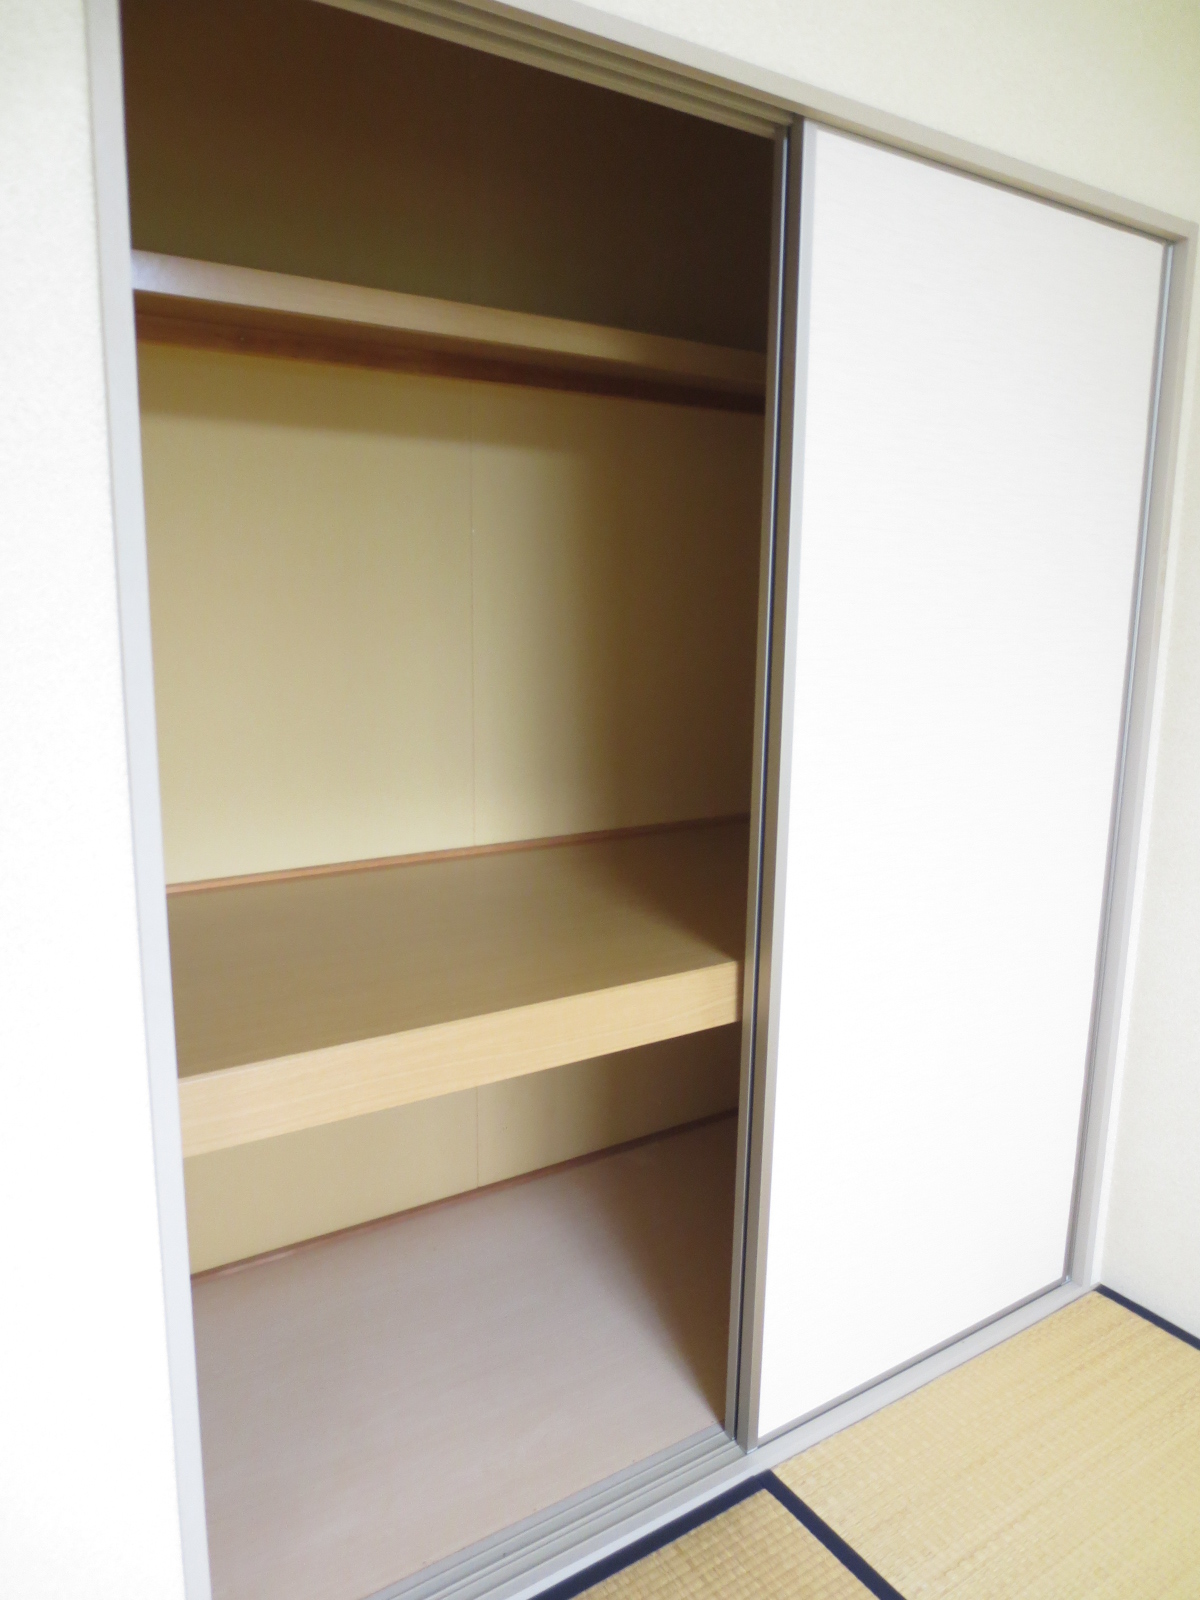 Receipt. It is the storage space of the Japanese-style room.